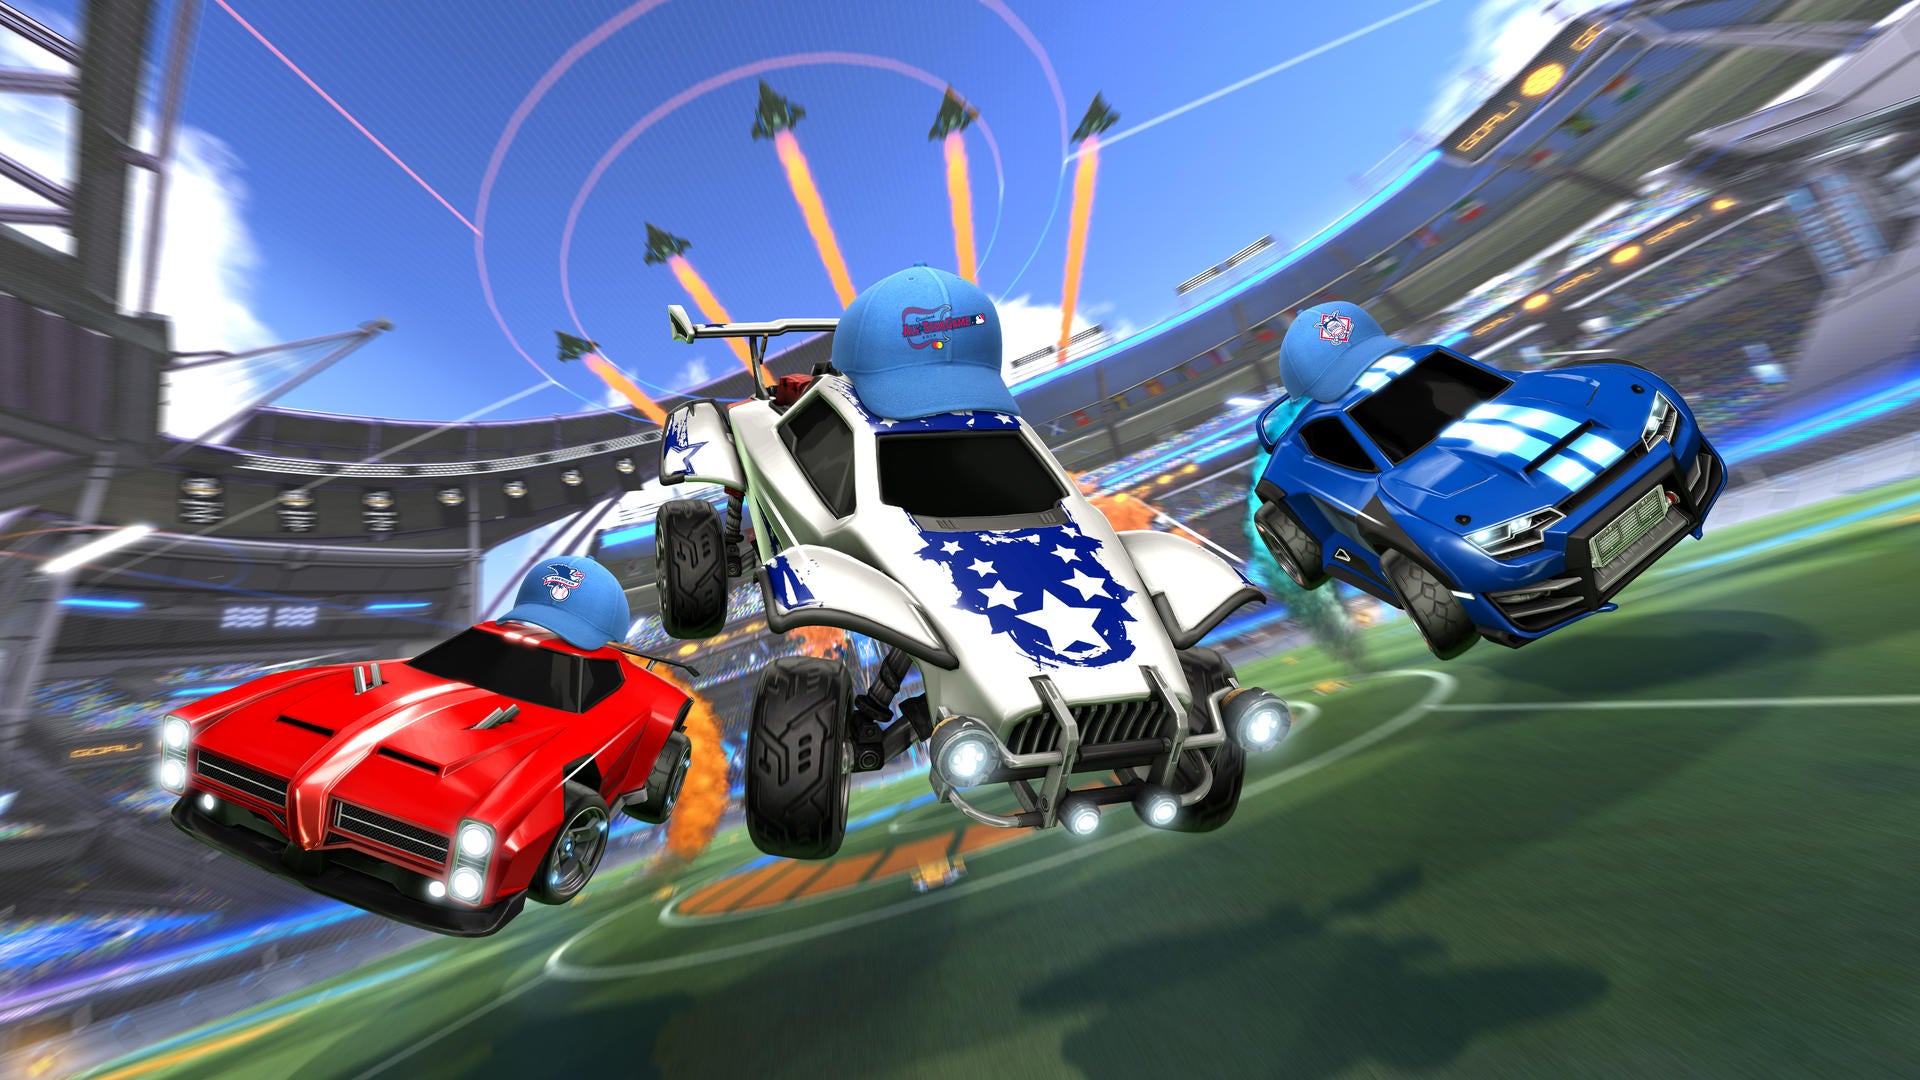 Update aggiornamento rocket league 1.65 patch notes